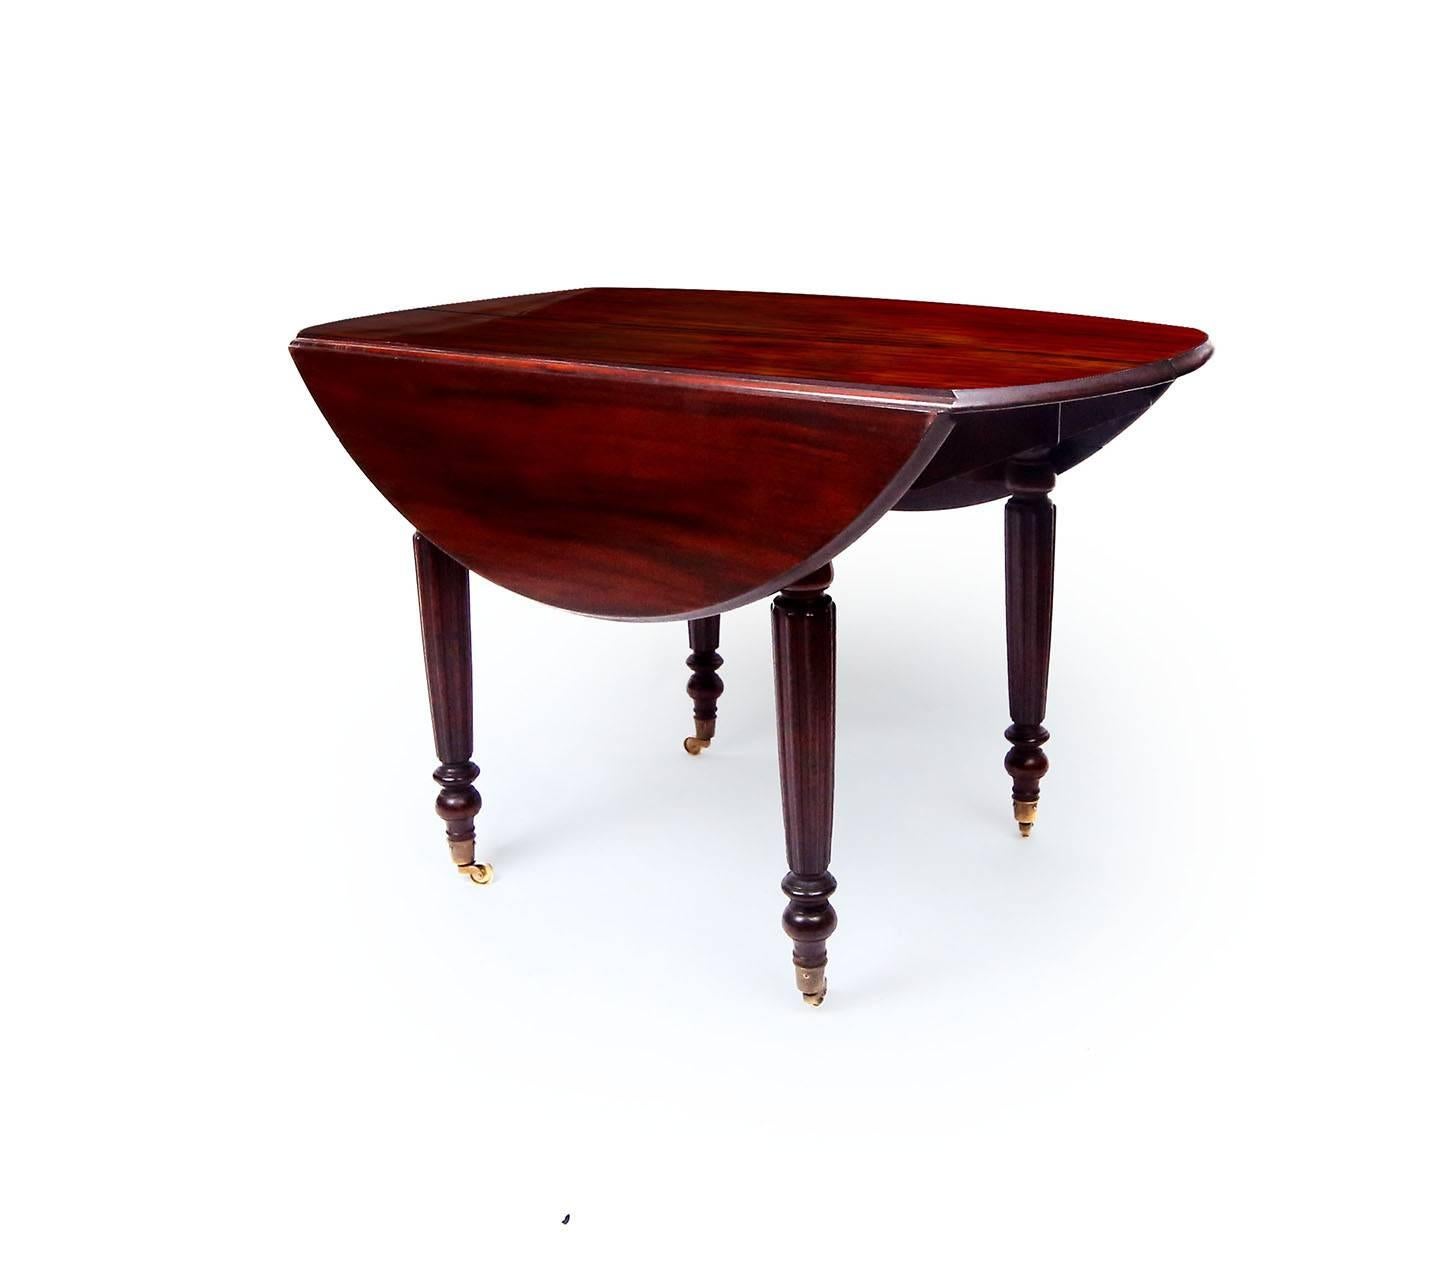 A rare, rich circular breakfast table or children's dining table in Cuban mahogany. Deep red lustre, the thick top boards have a molded edge. The base composed of tapering legs with reeded legs and spooled bases. France or England in the manner of